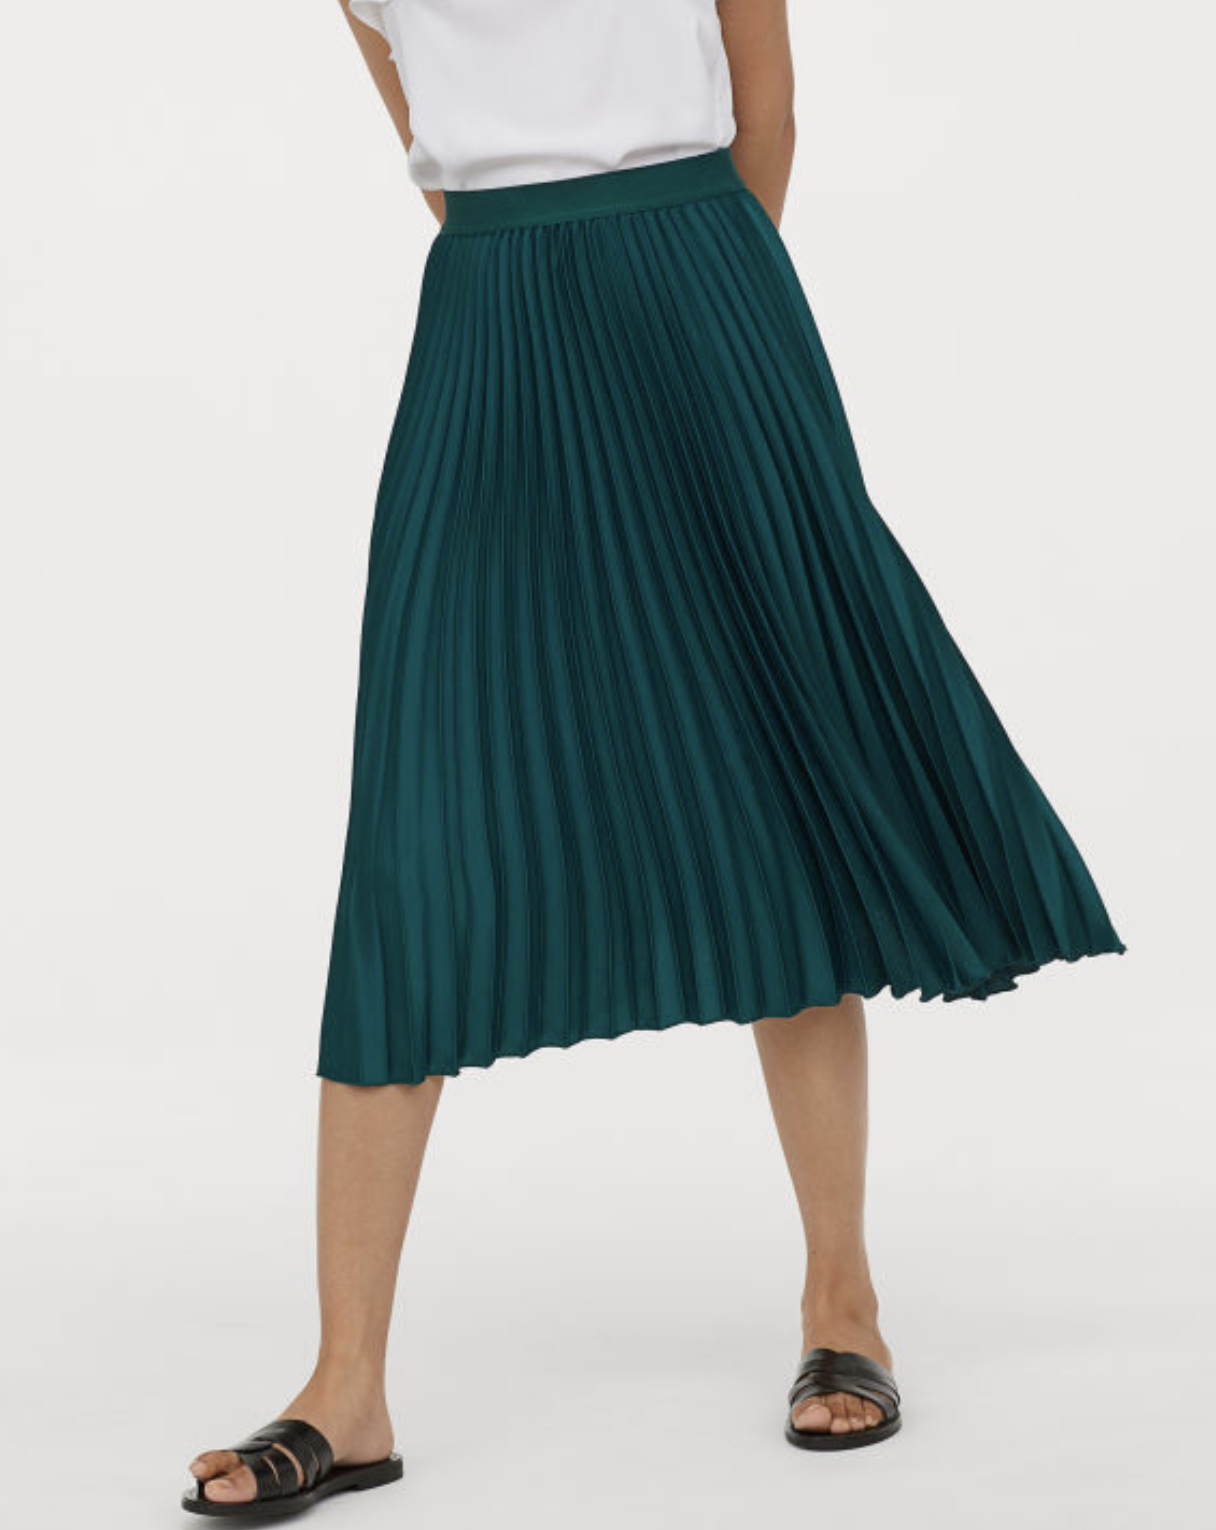 green pleated skirt H&M